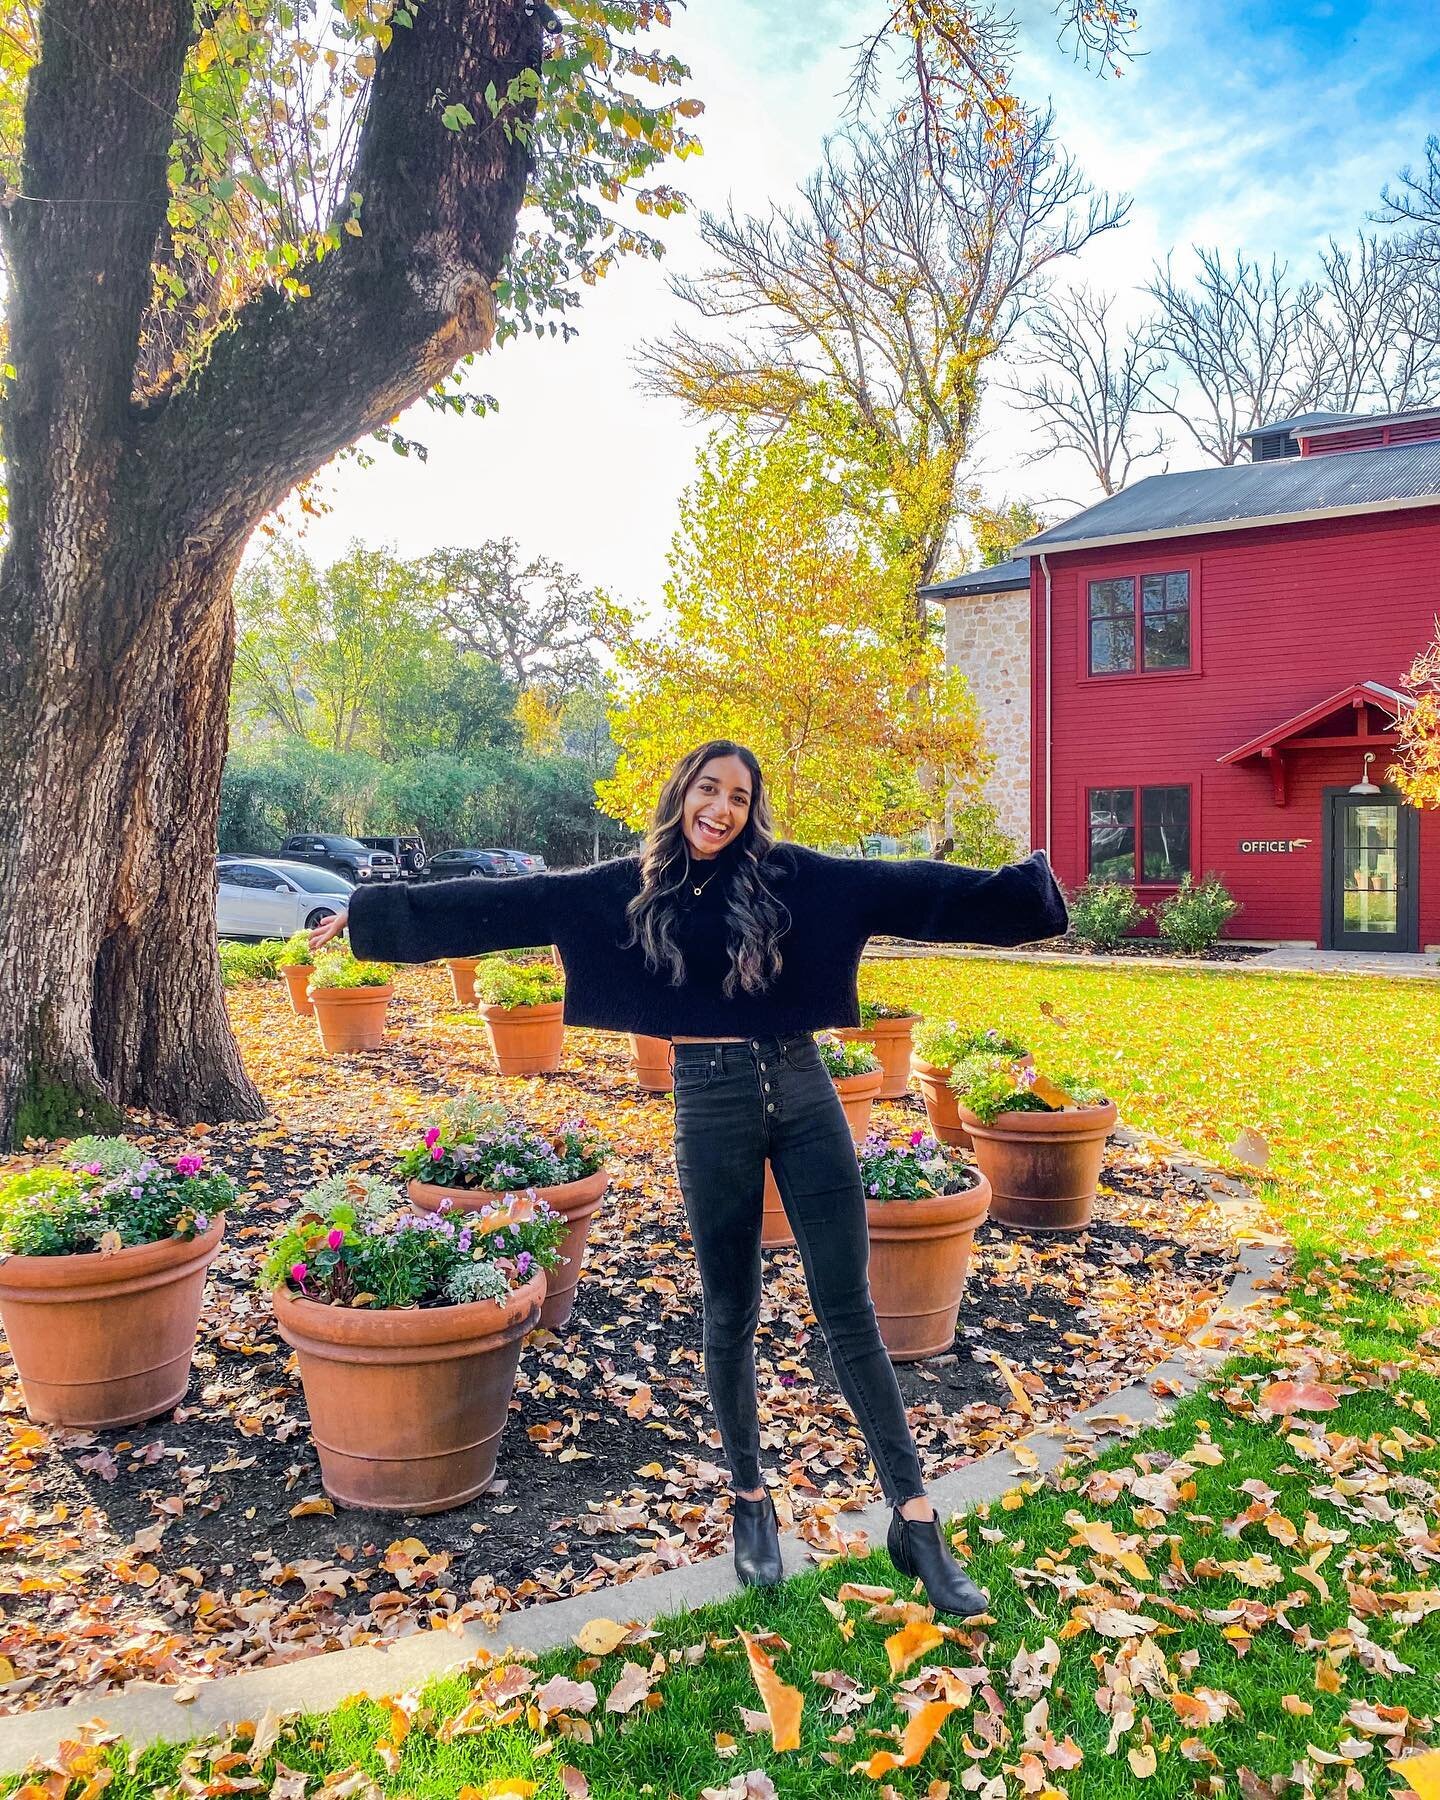 seasons?! falling for ya, autumn🍁

Fall reminds us to ground down, let go, and lean into the offerings of this season. December can bring what seems like a million things to do between various holidays and celebrations, finals week for all of us who